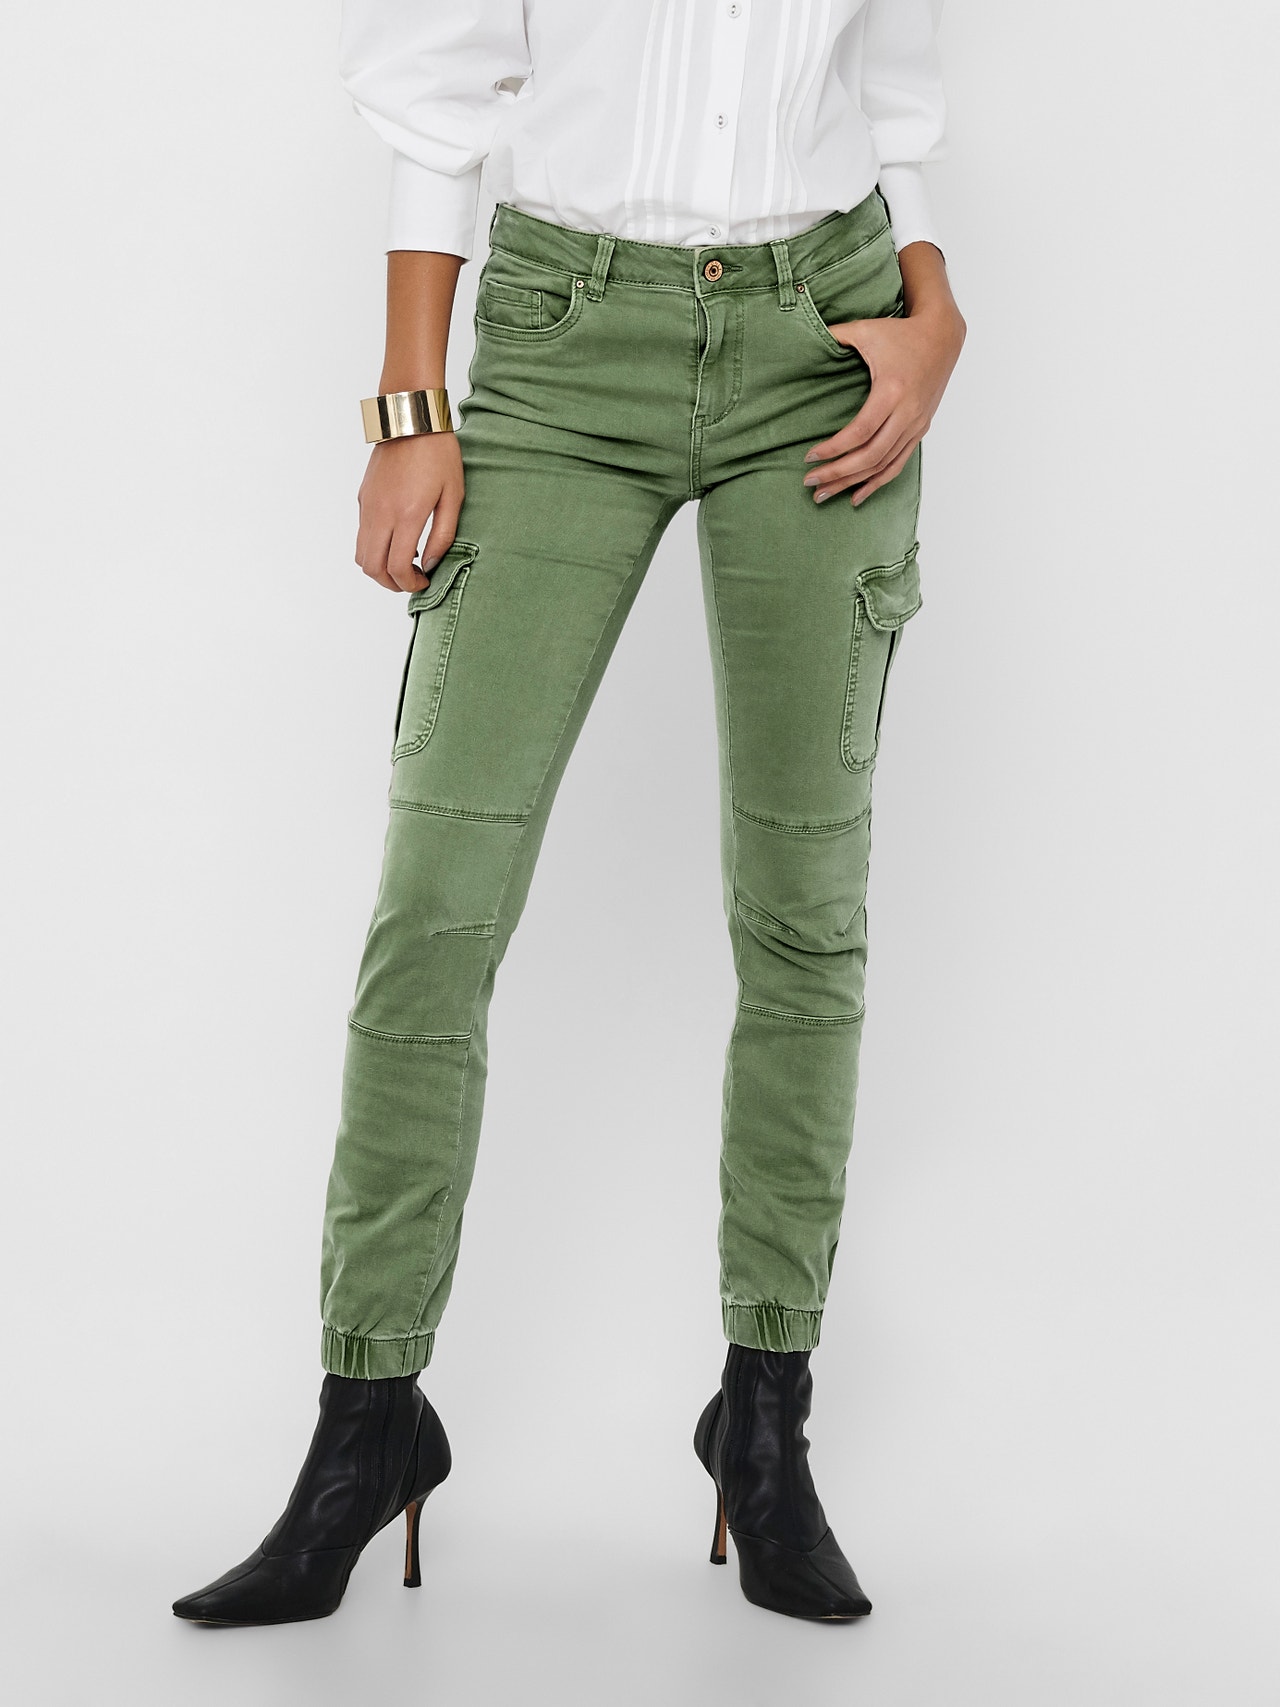 ONLY Slim Fit Mid waist Elasticated hems Trousers -Oil Green - 15170889